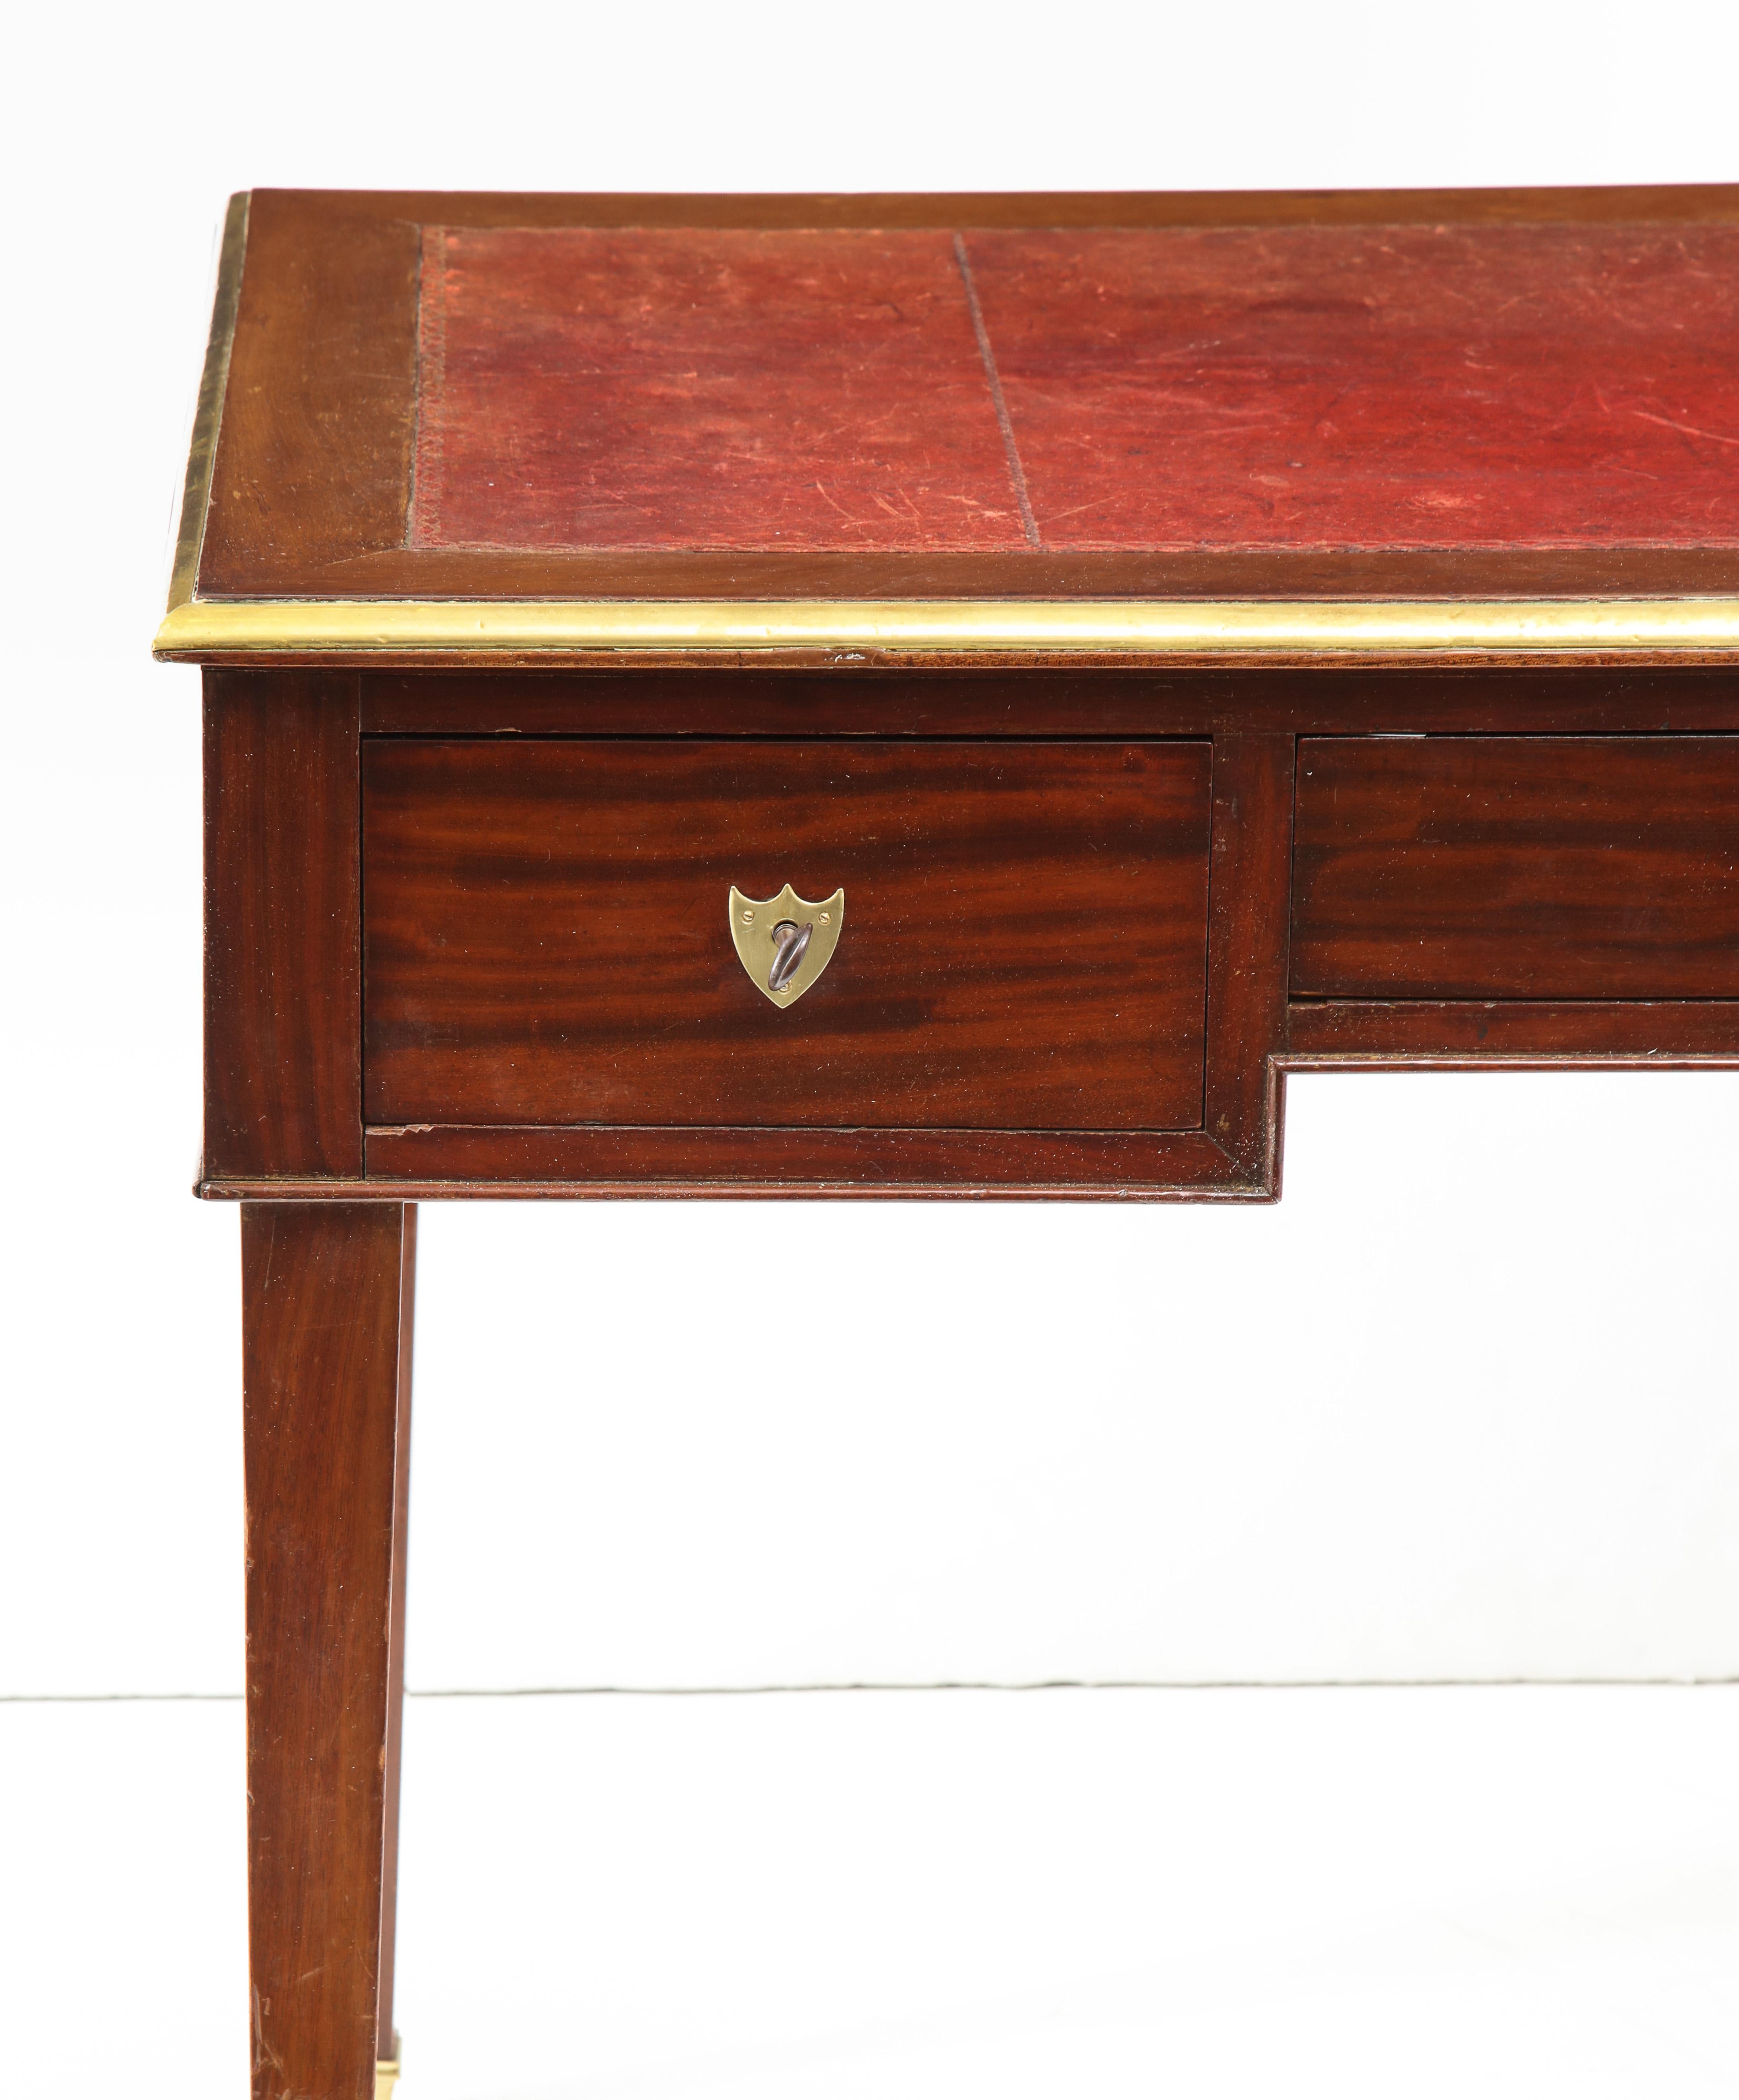 Despite its clean, simple lines, this Louis XVI period bureau plat has real star power. In mahogany with brass detailing and a red leather top, the finish has warn to a lovely warm patina. The writing table features three drawers, with shield key